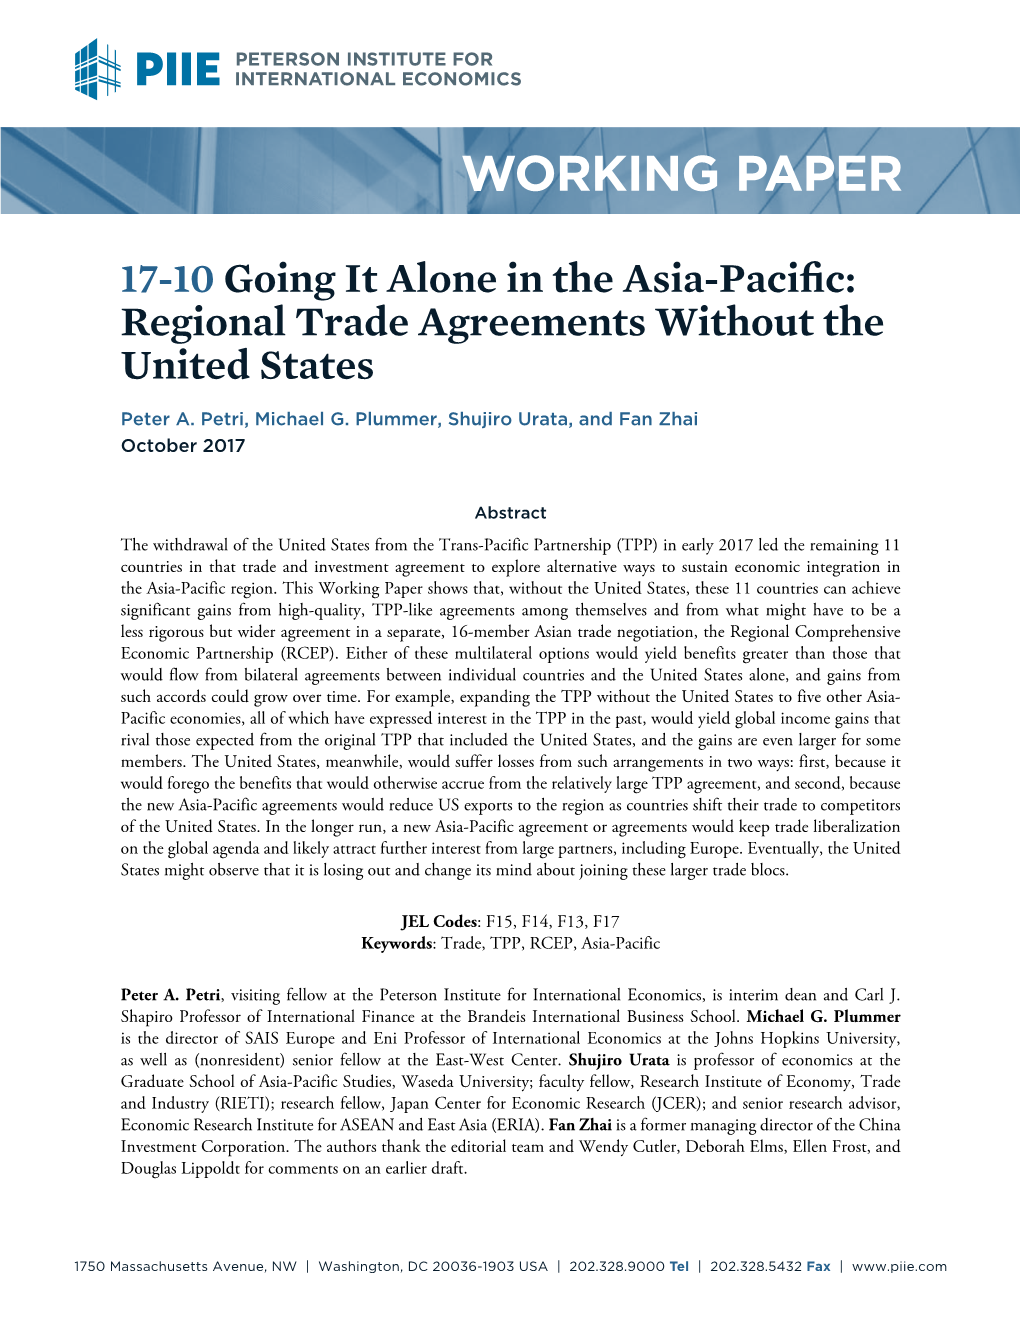 Going It Alone in the Asia-Pacific: Regional Trade Agreements Without the United States